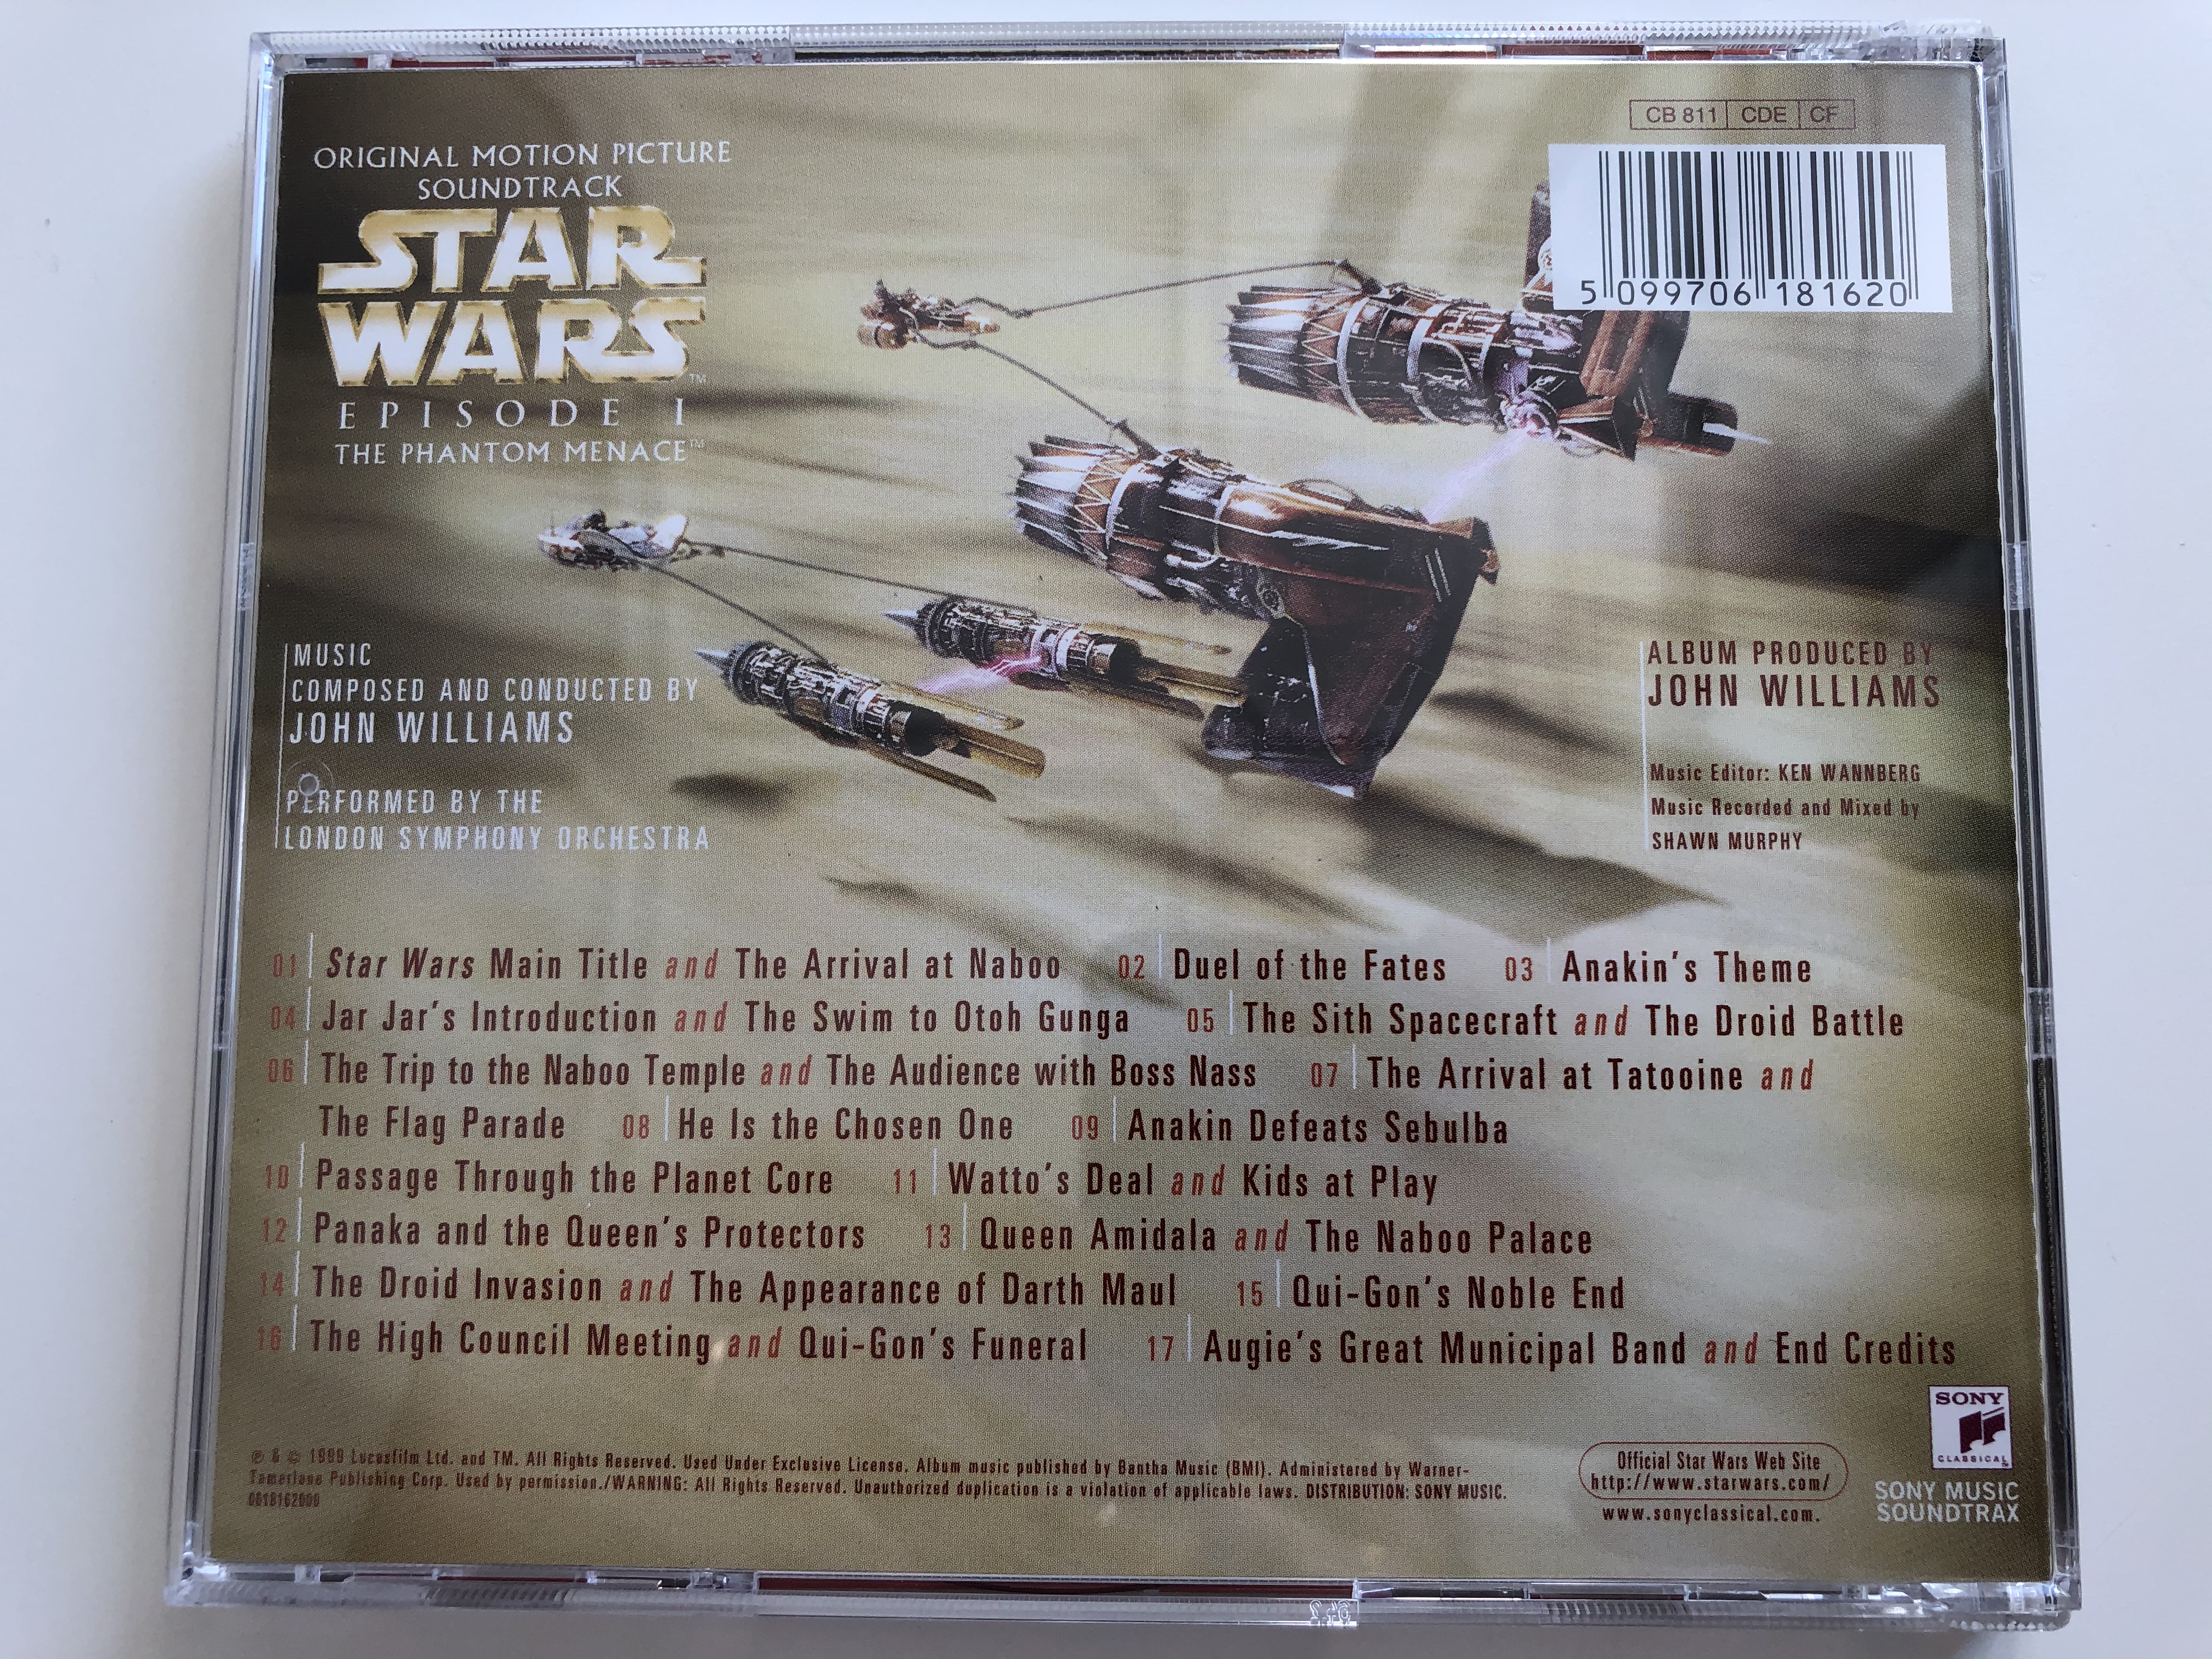 original-motion-picture-soundtrack-star-wars-episode-i-the-phantom-menace-music-composed-and-conducted-by-john-williams-sony-classical-audio-cd-1999-sk-61816-2-.jpg